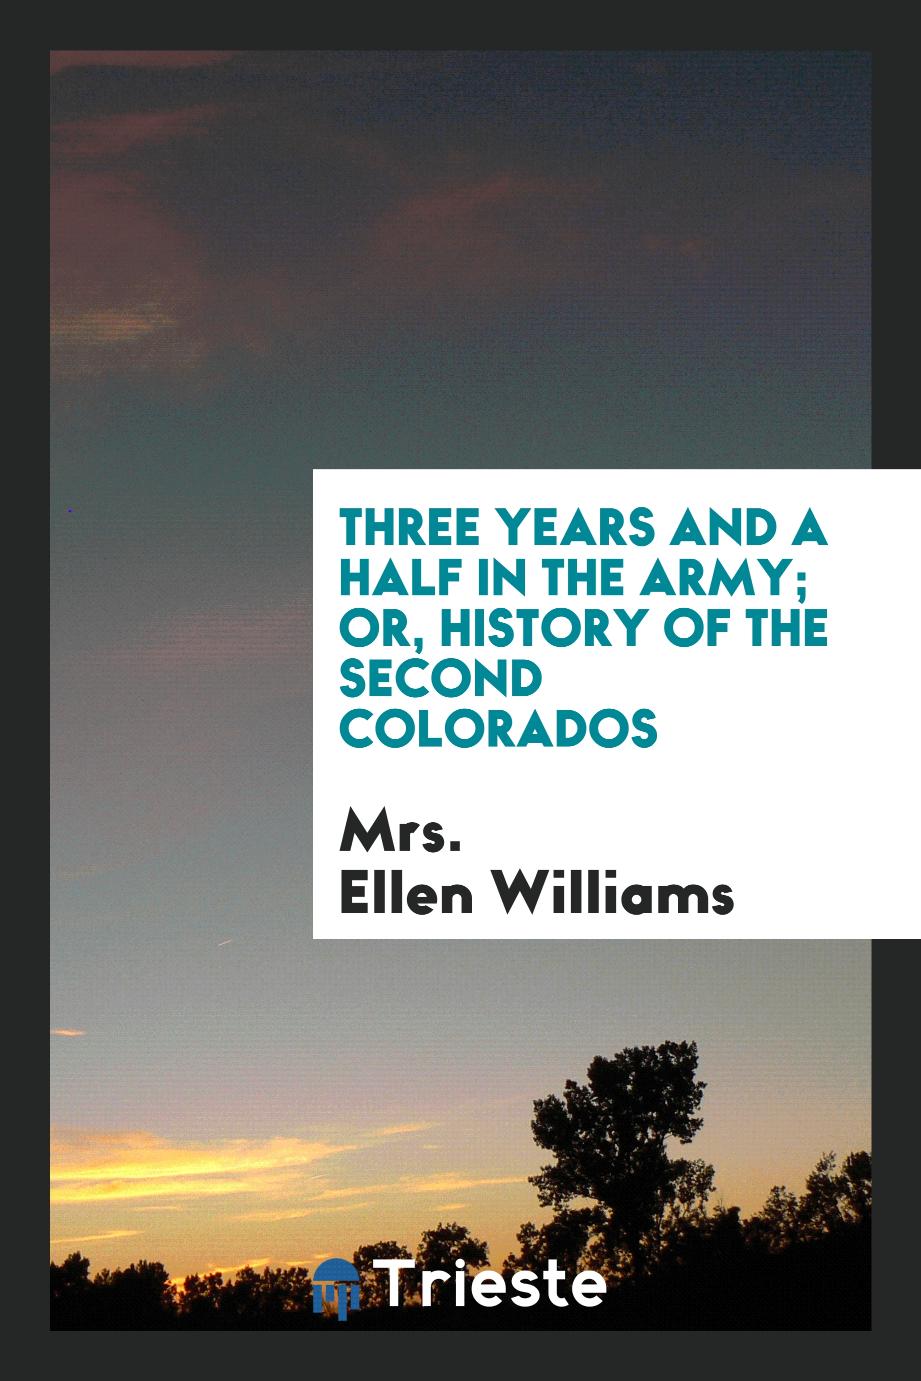 Three years and a half in the Army; or, History of the Second Colorados